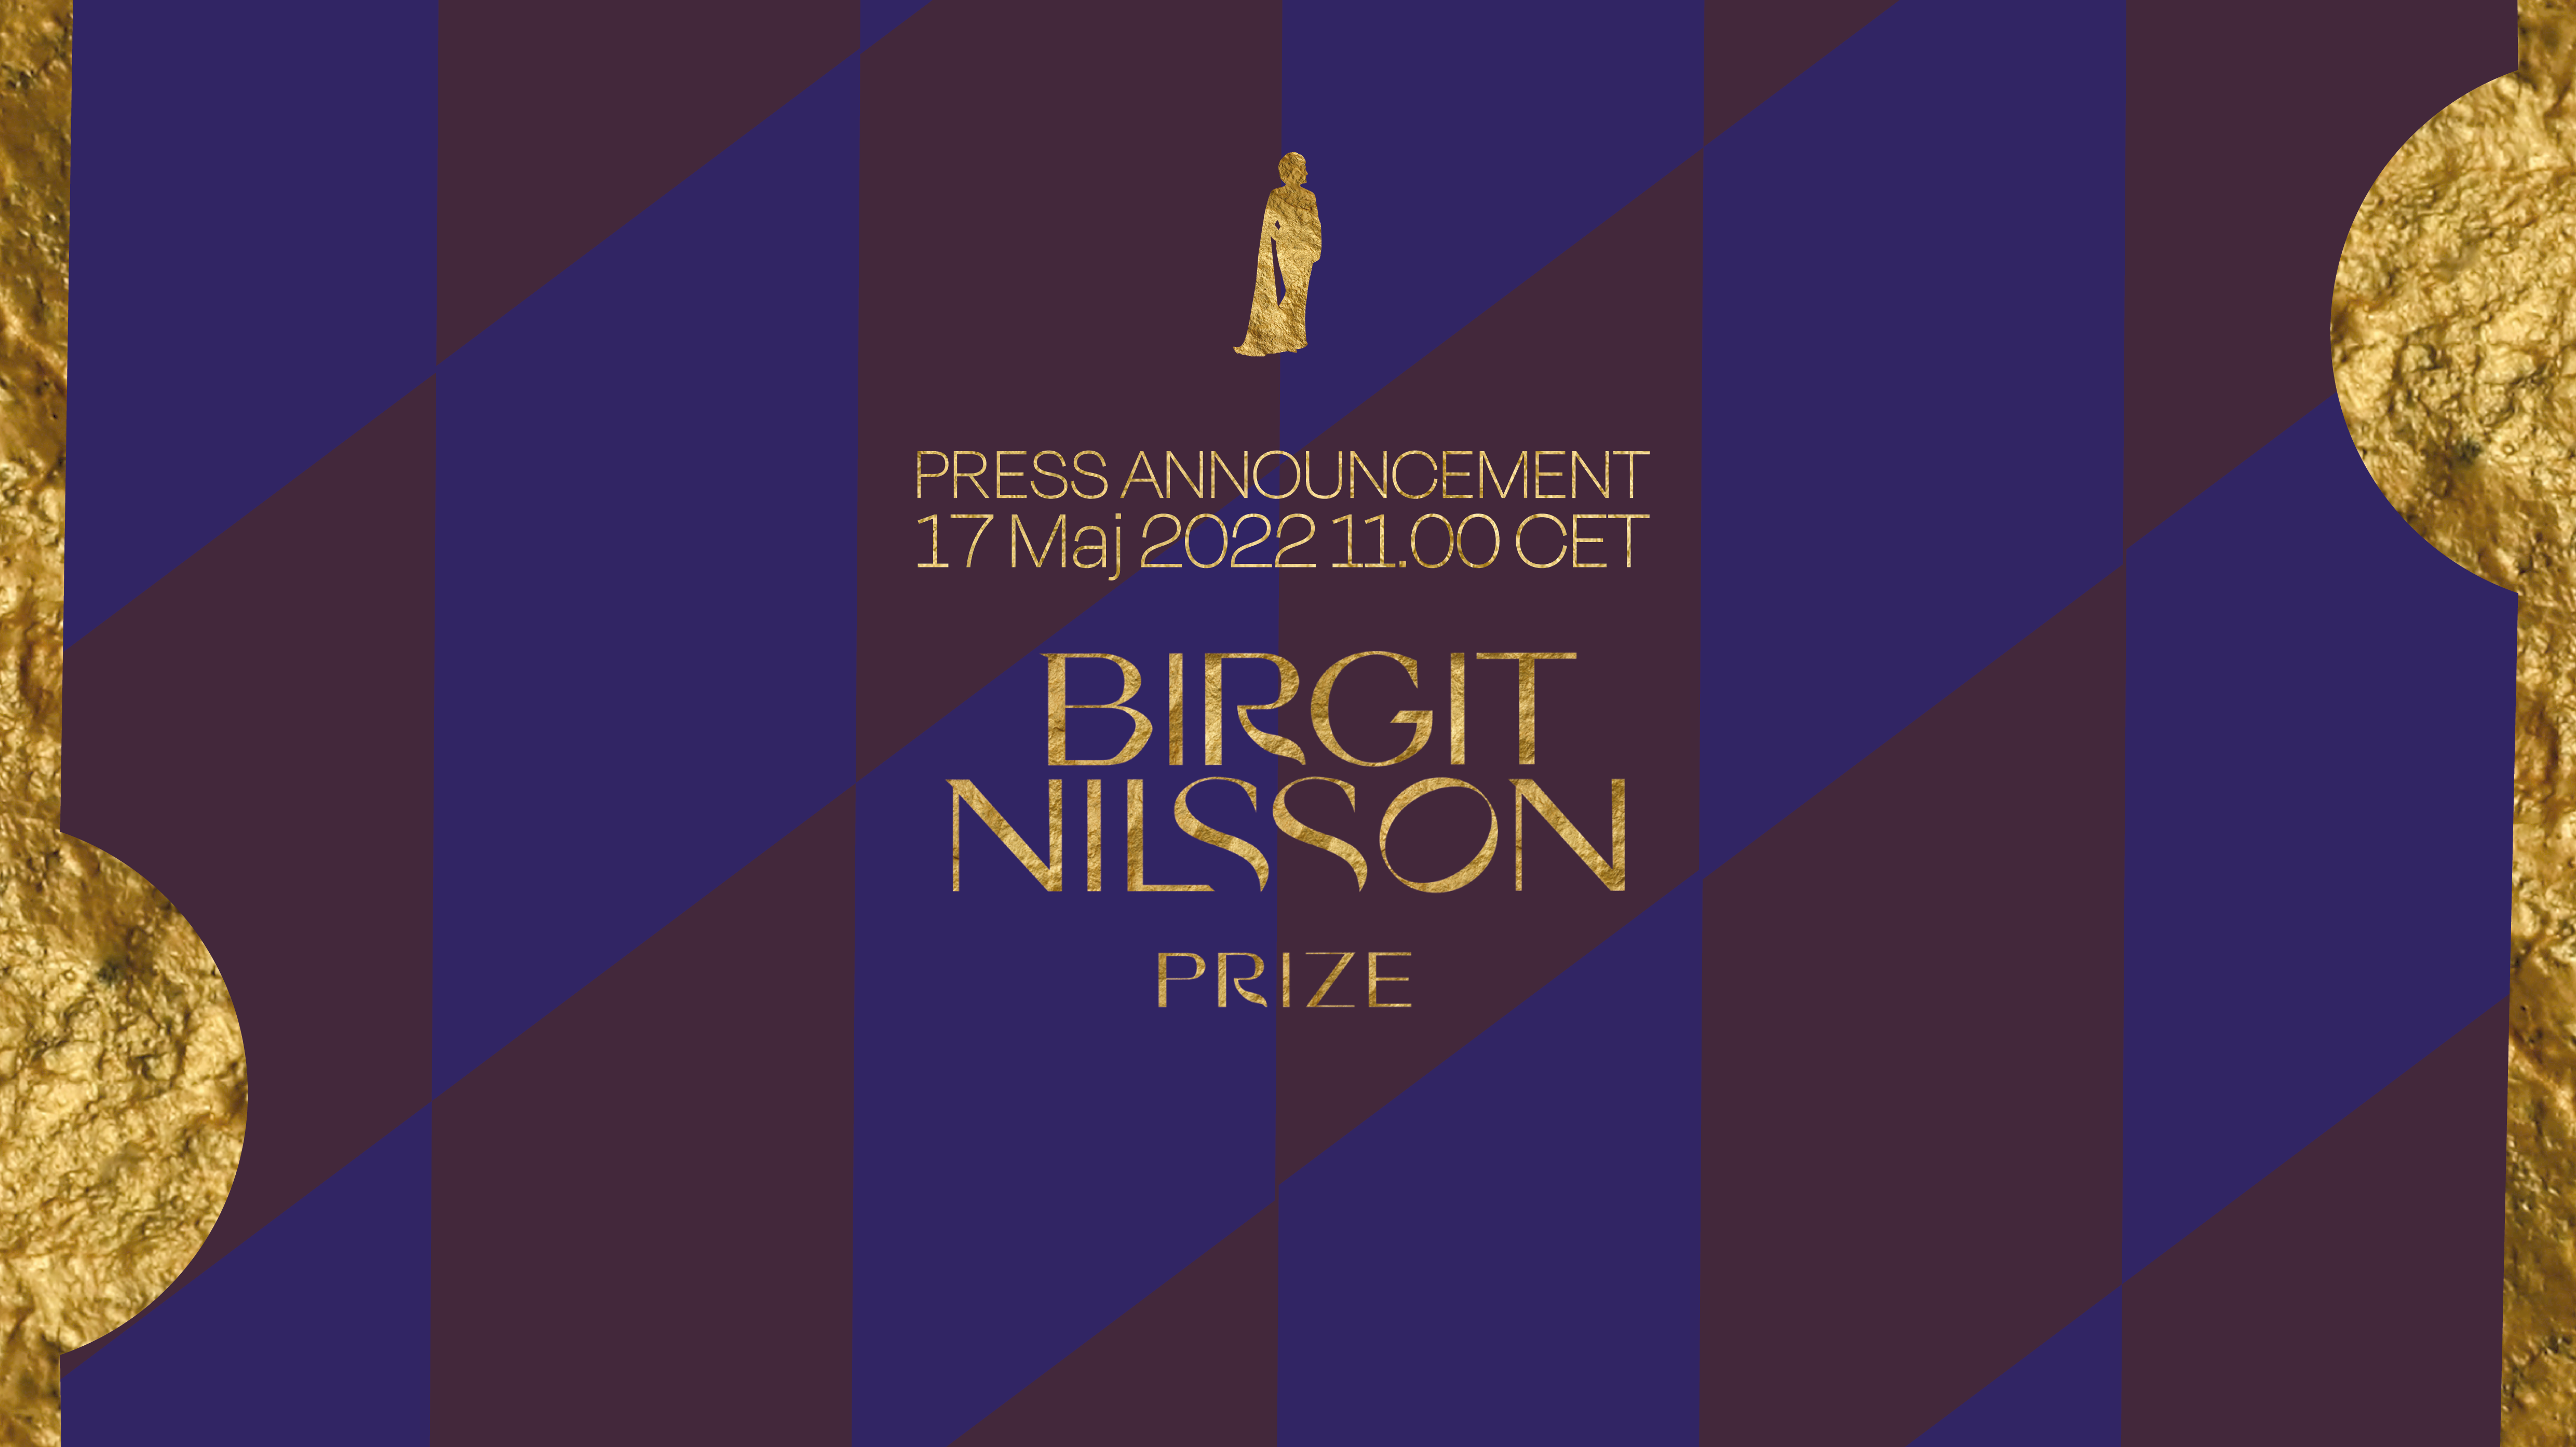 You are currently viewing 2022 Birgit Nilsson Prize announcement live streamed